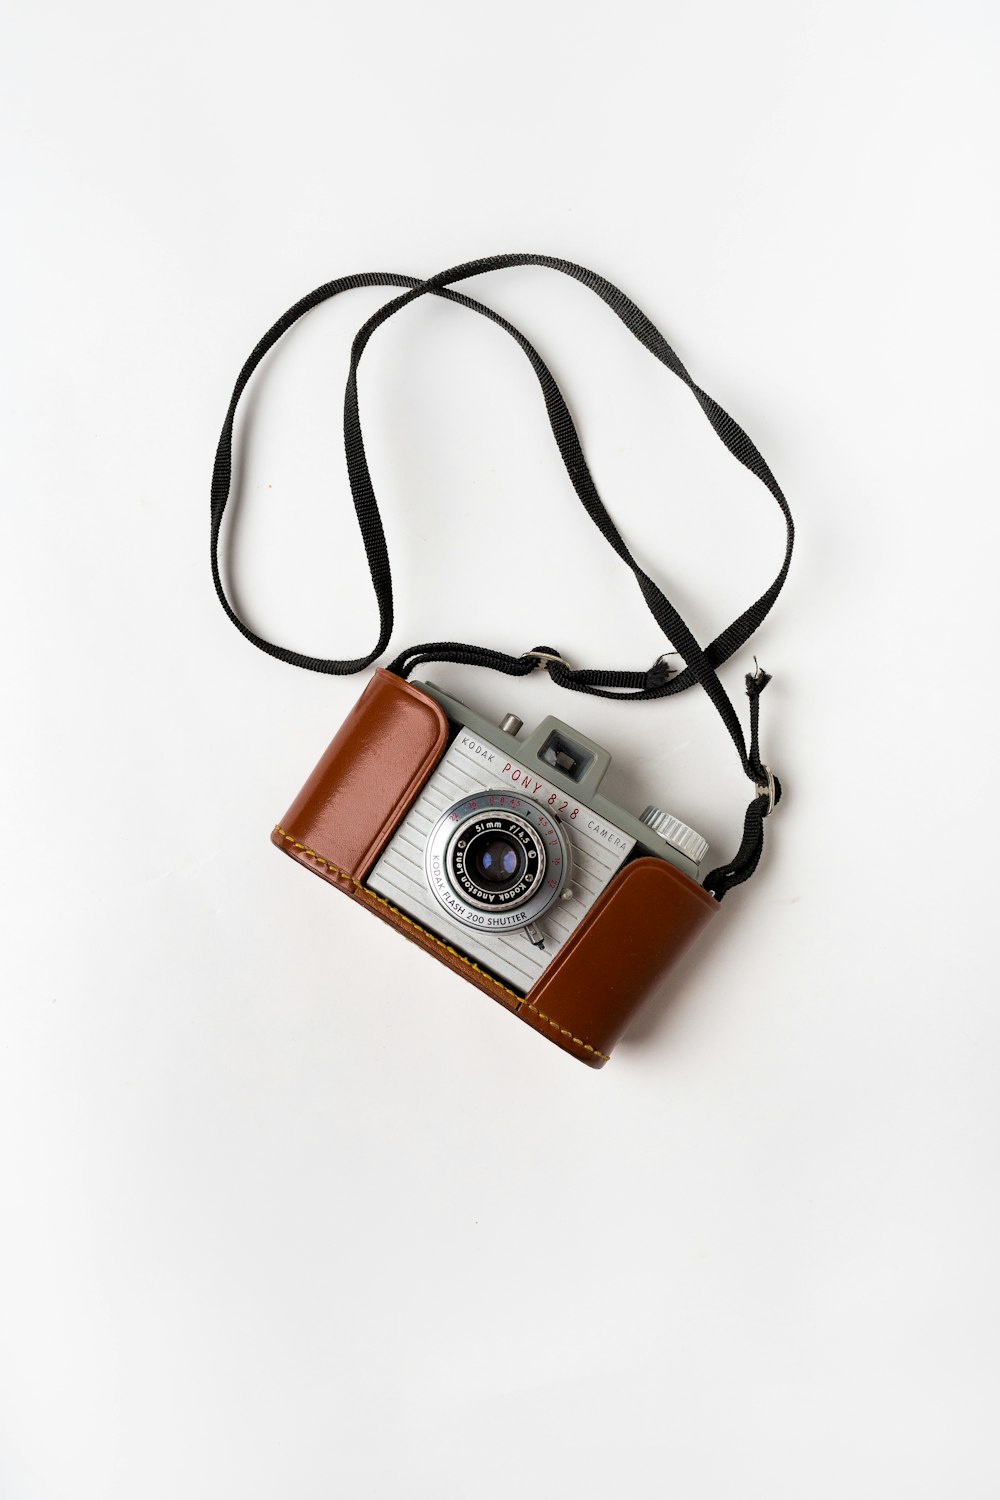 brown and gray SLR camera on white surface